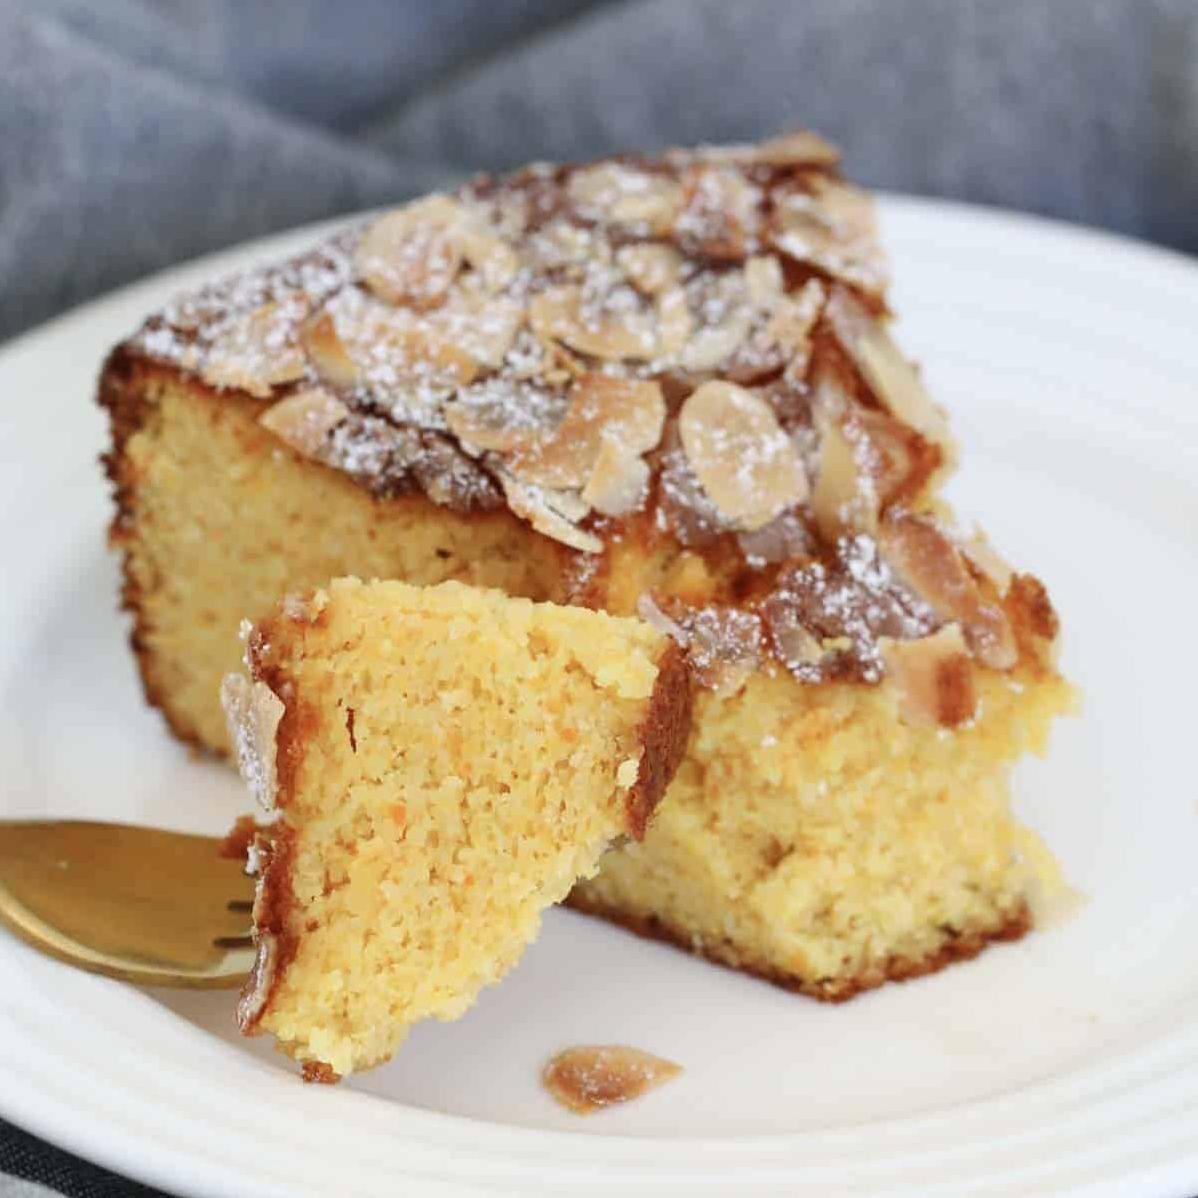  A gluten-free treat that packs a punch of flavor: Orange and Almond Cake